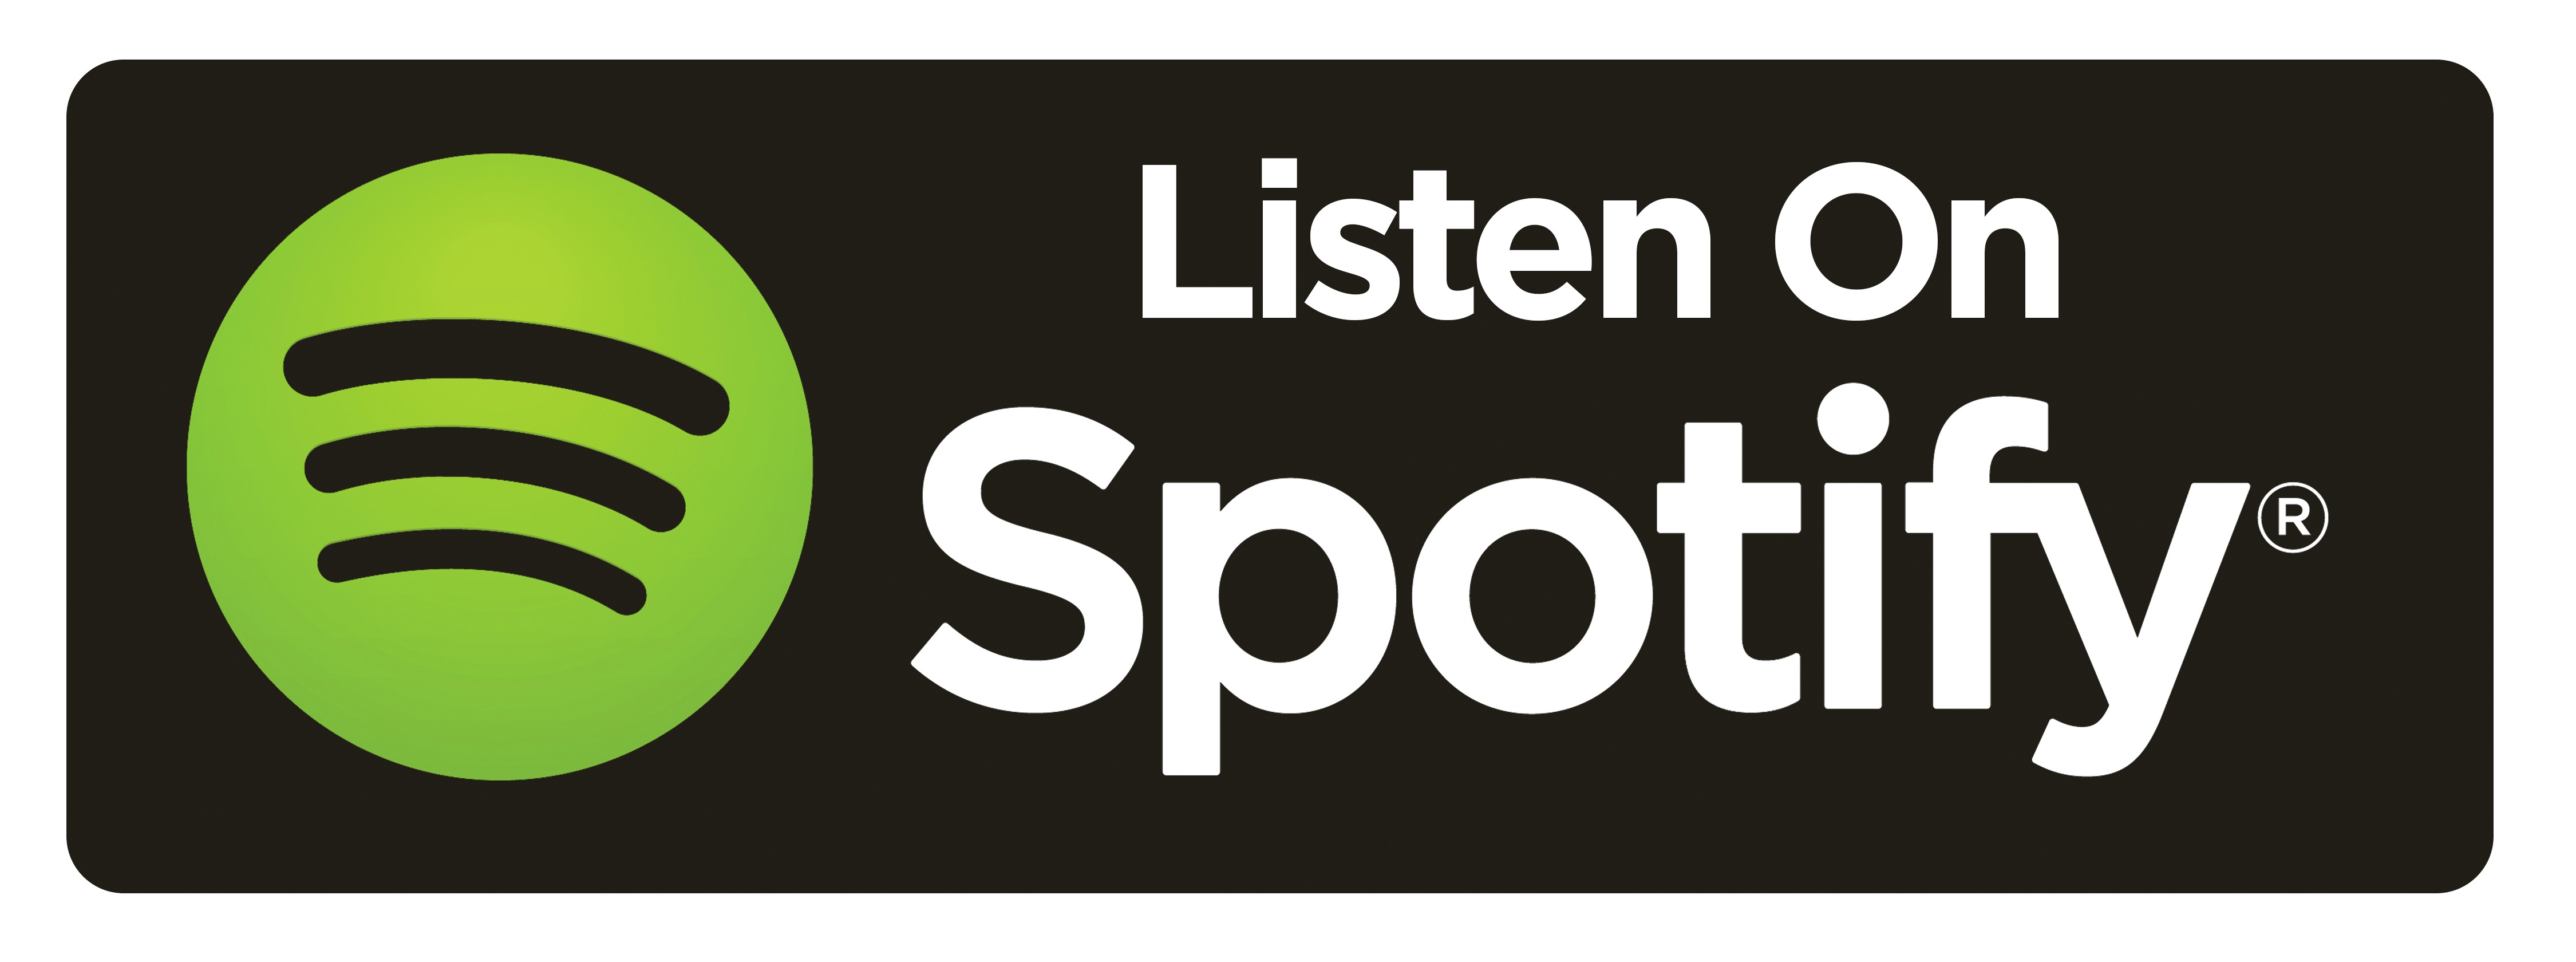 Listen-on-Spotify-badge-button